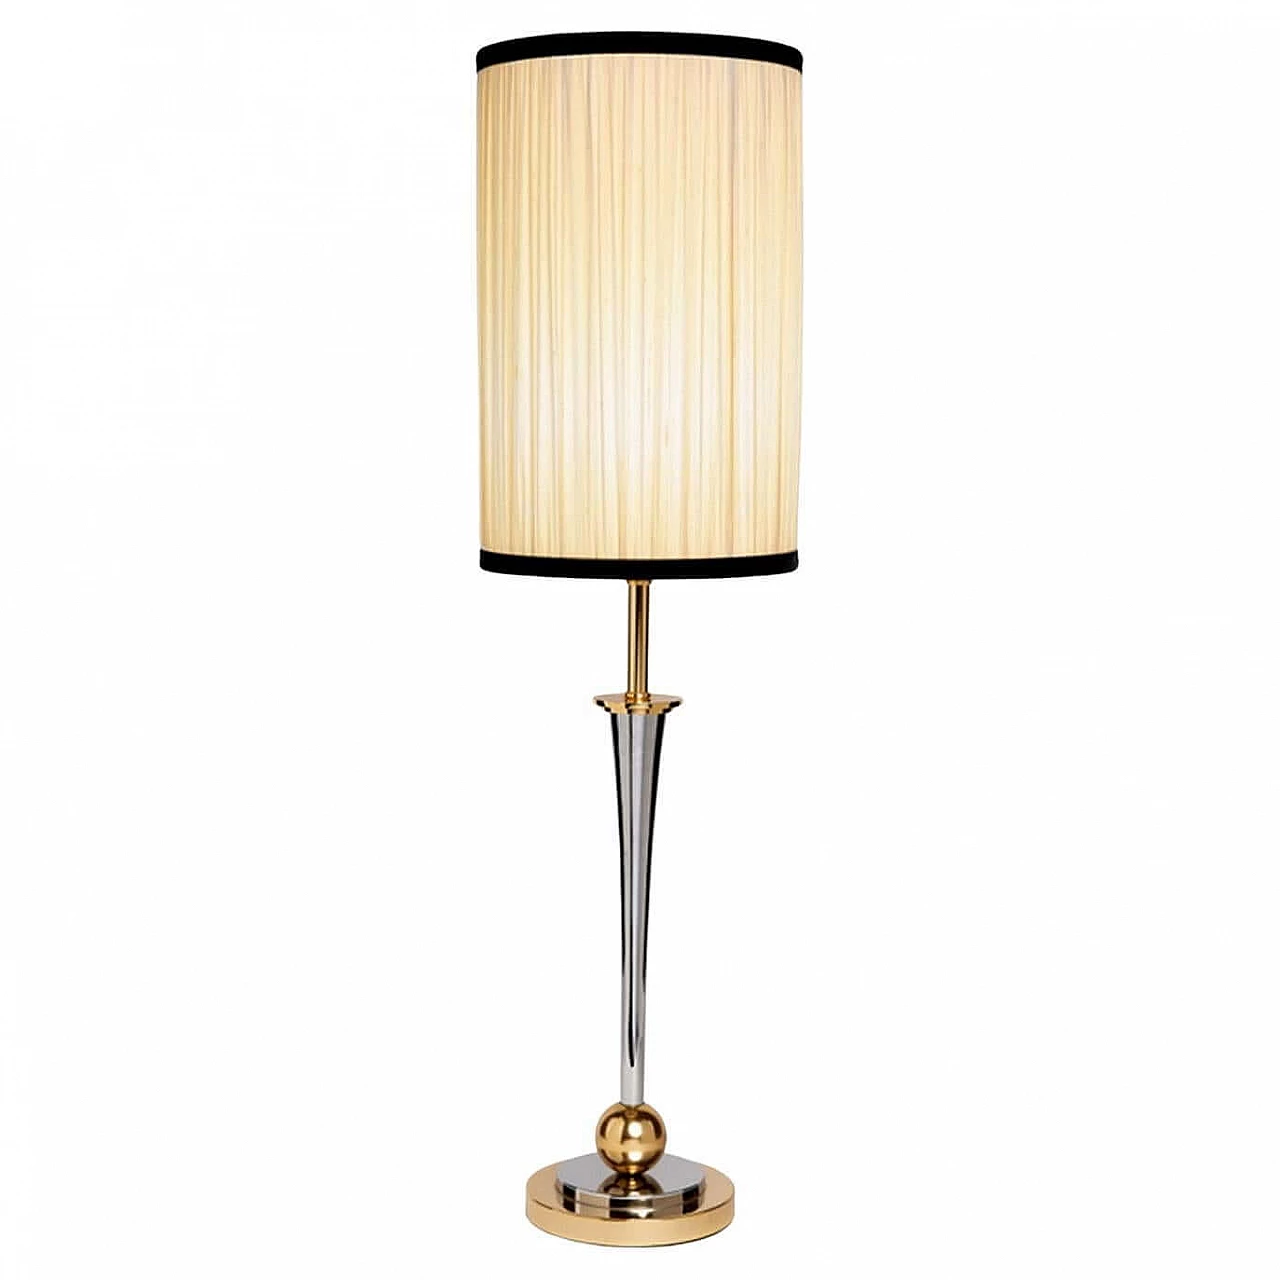 Mazda style table lamp without shade, 1960s 1